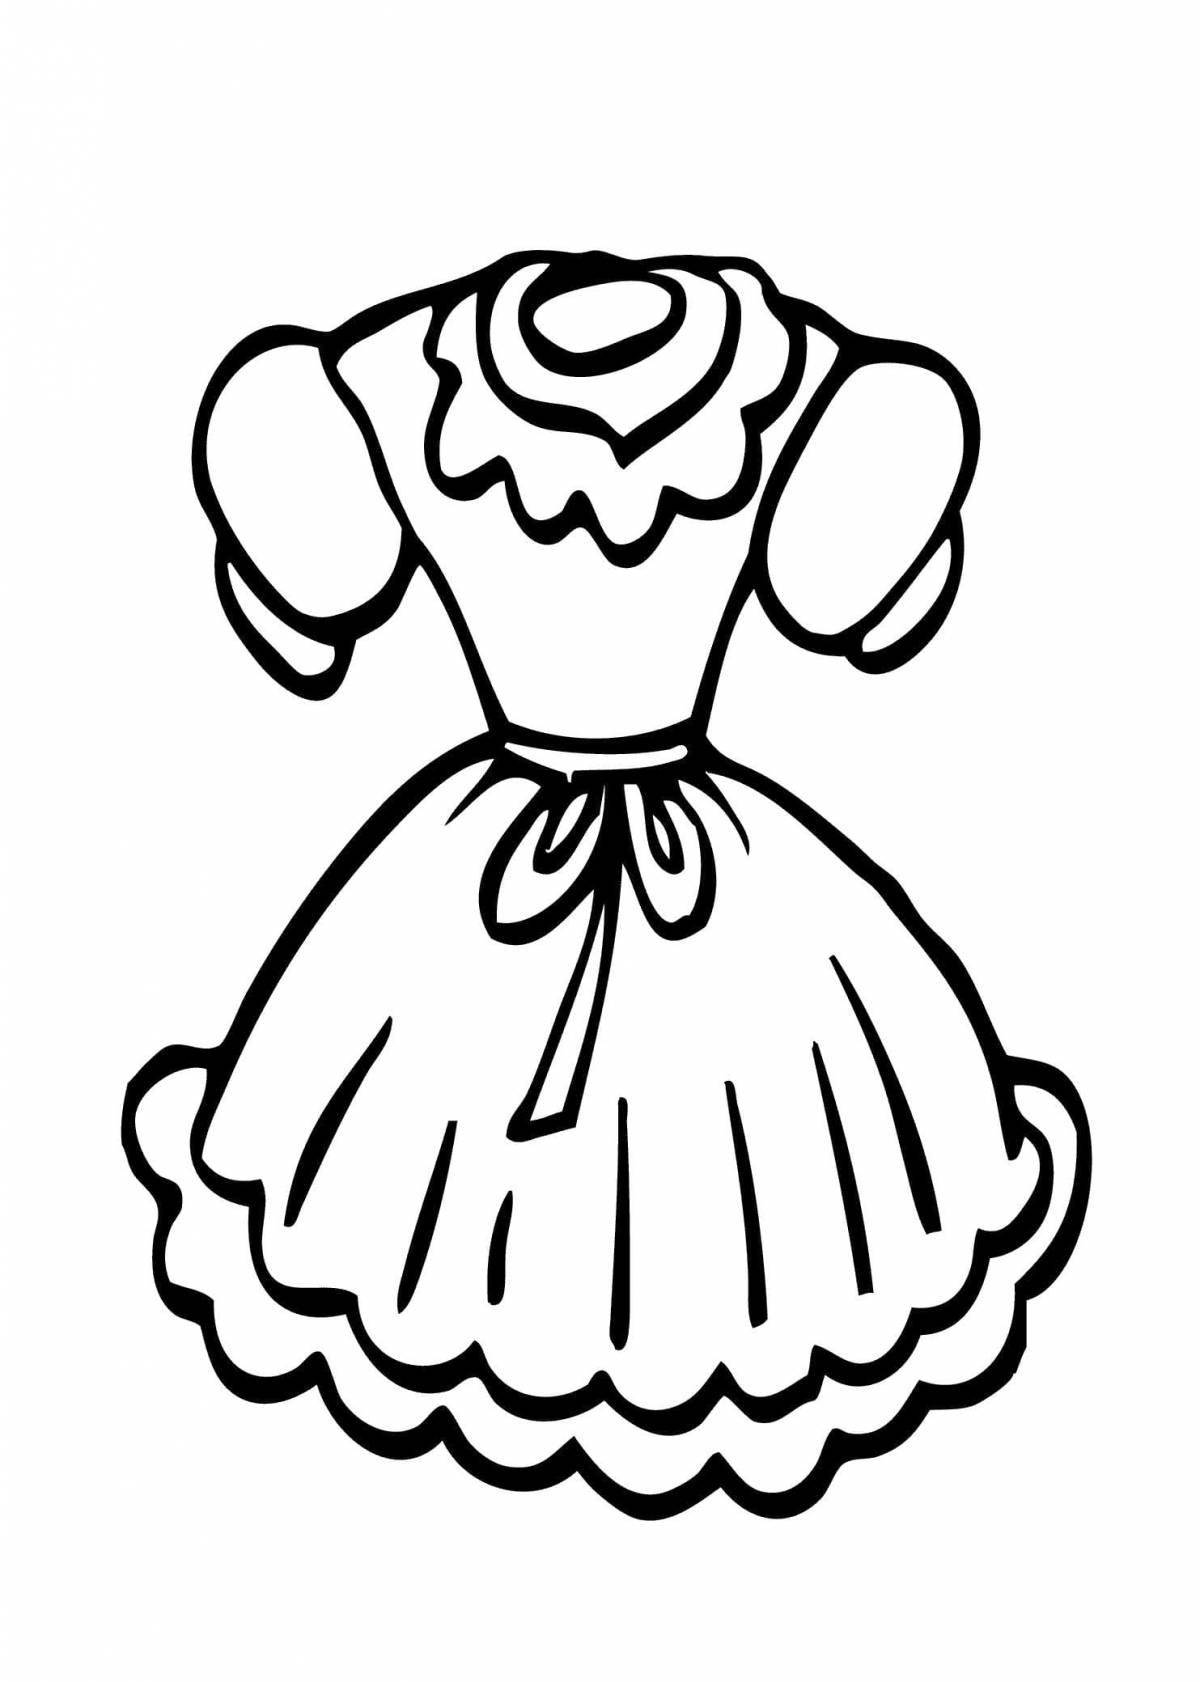 Doll fancy dress coloring page